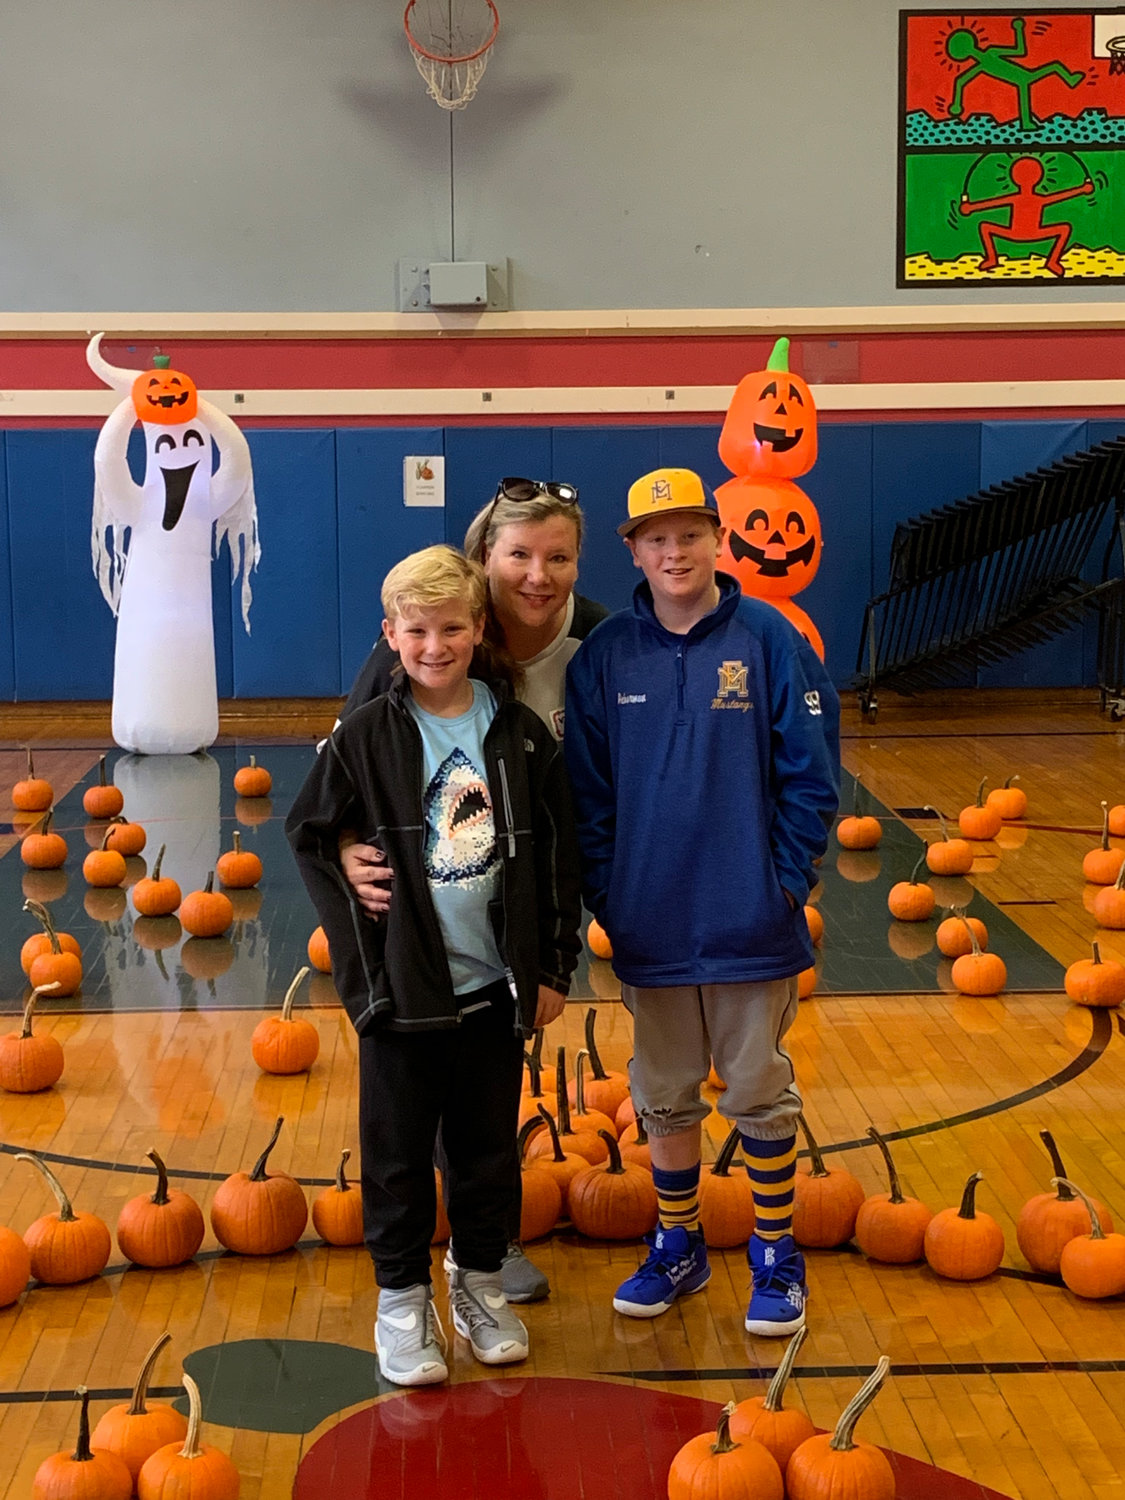 Jennette Ackerman, president of the Barnum Woods PTA, with her sons, Bennett, left, and Connor in 2020 at the PTA-sponsored Pumpkin Patch, focuses on giving children fun school experiences.